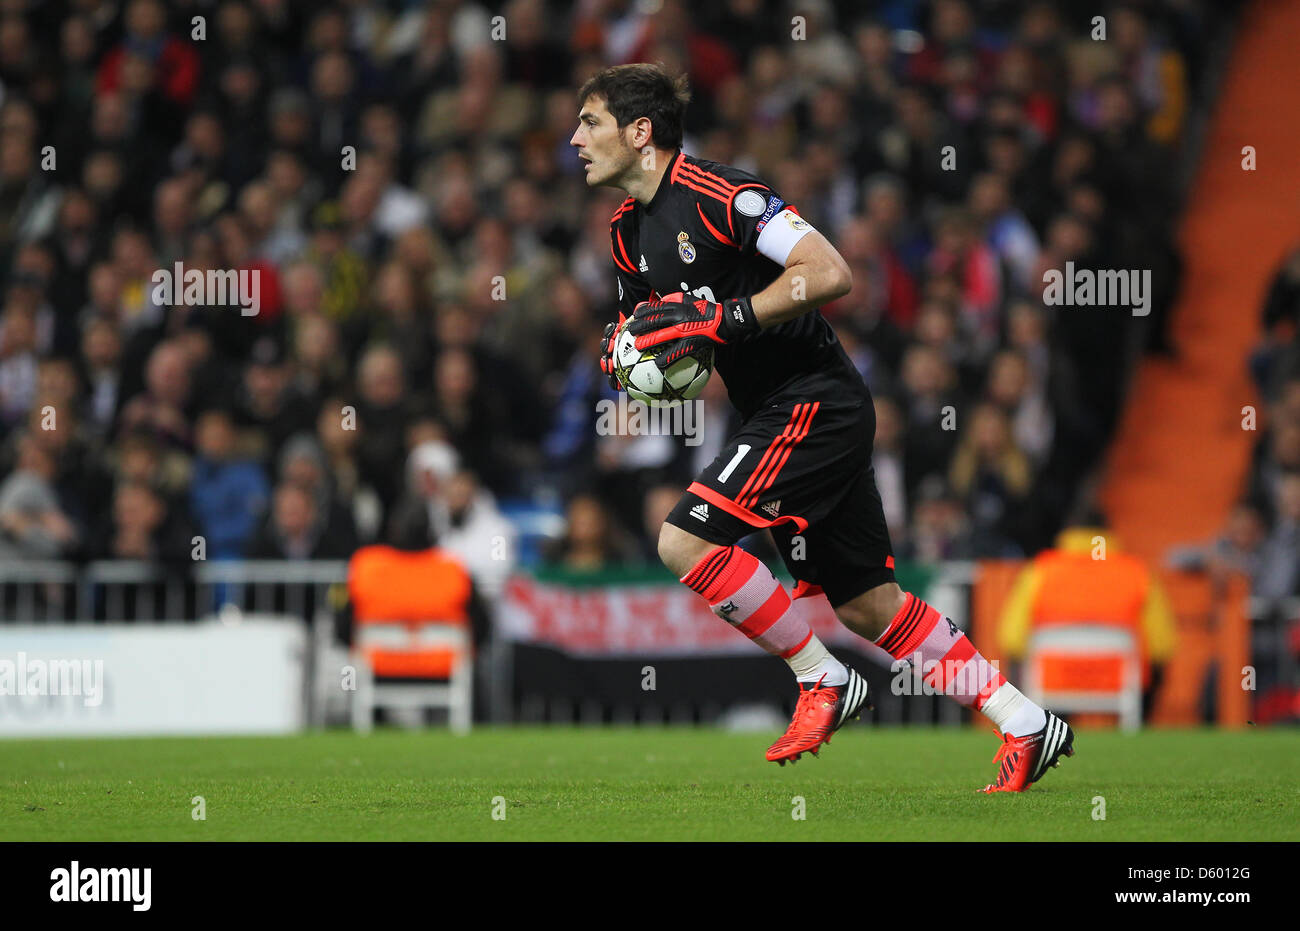 Real Madridss goalkeeper Iker Casillas in action during the Champions League Group D soccer match between Real Madrid and Borussia Dortmund at the Santiago Bernabeu Stadium in Madrid, Spain, 6 November 2012. The match ended 2:2. Photo: Fabian Stratenschulte/dpa Stock Photo